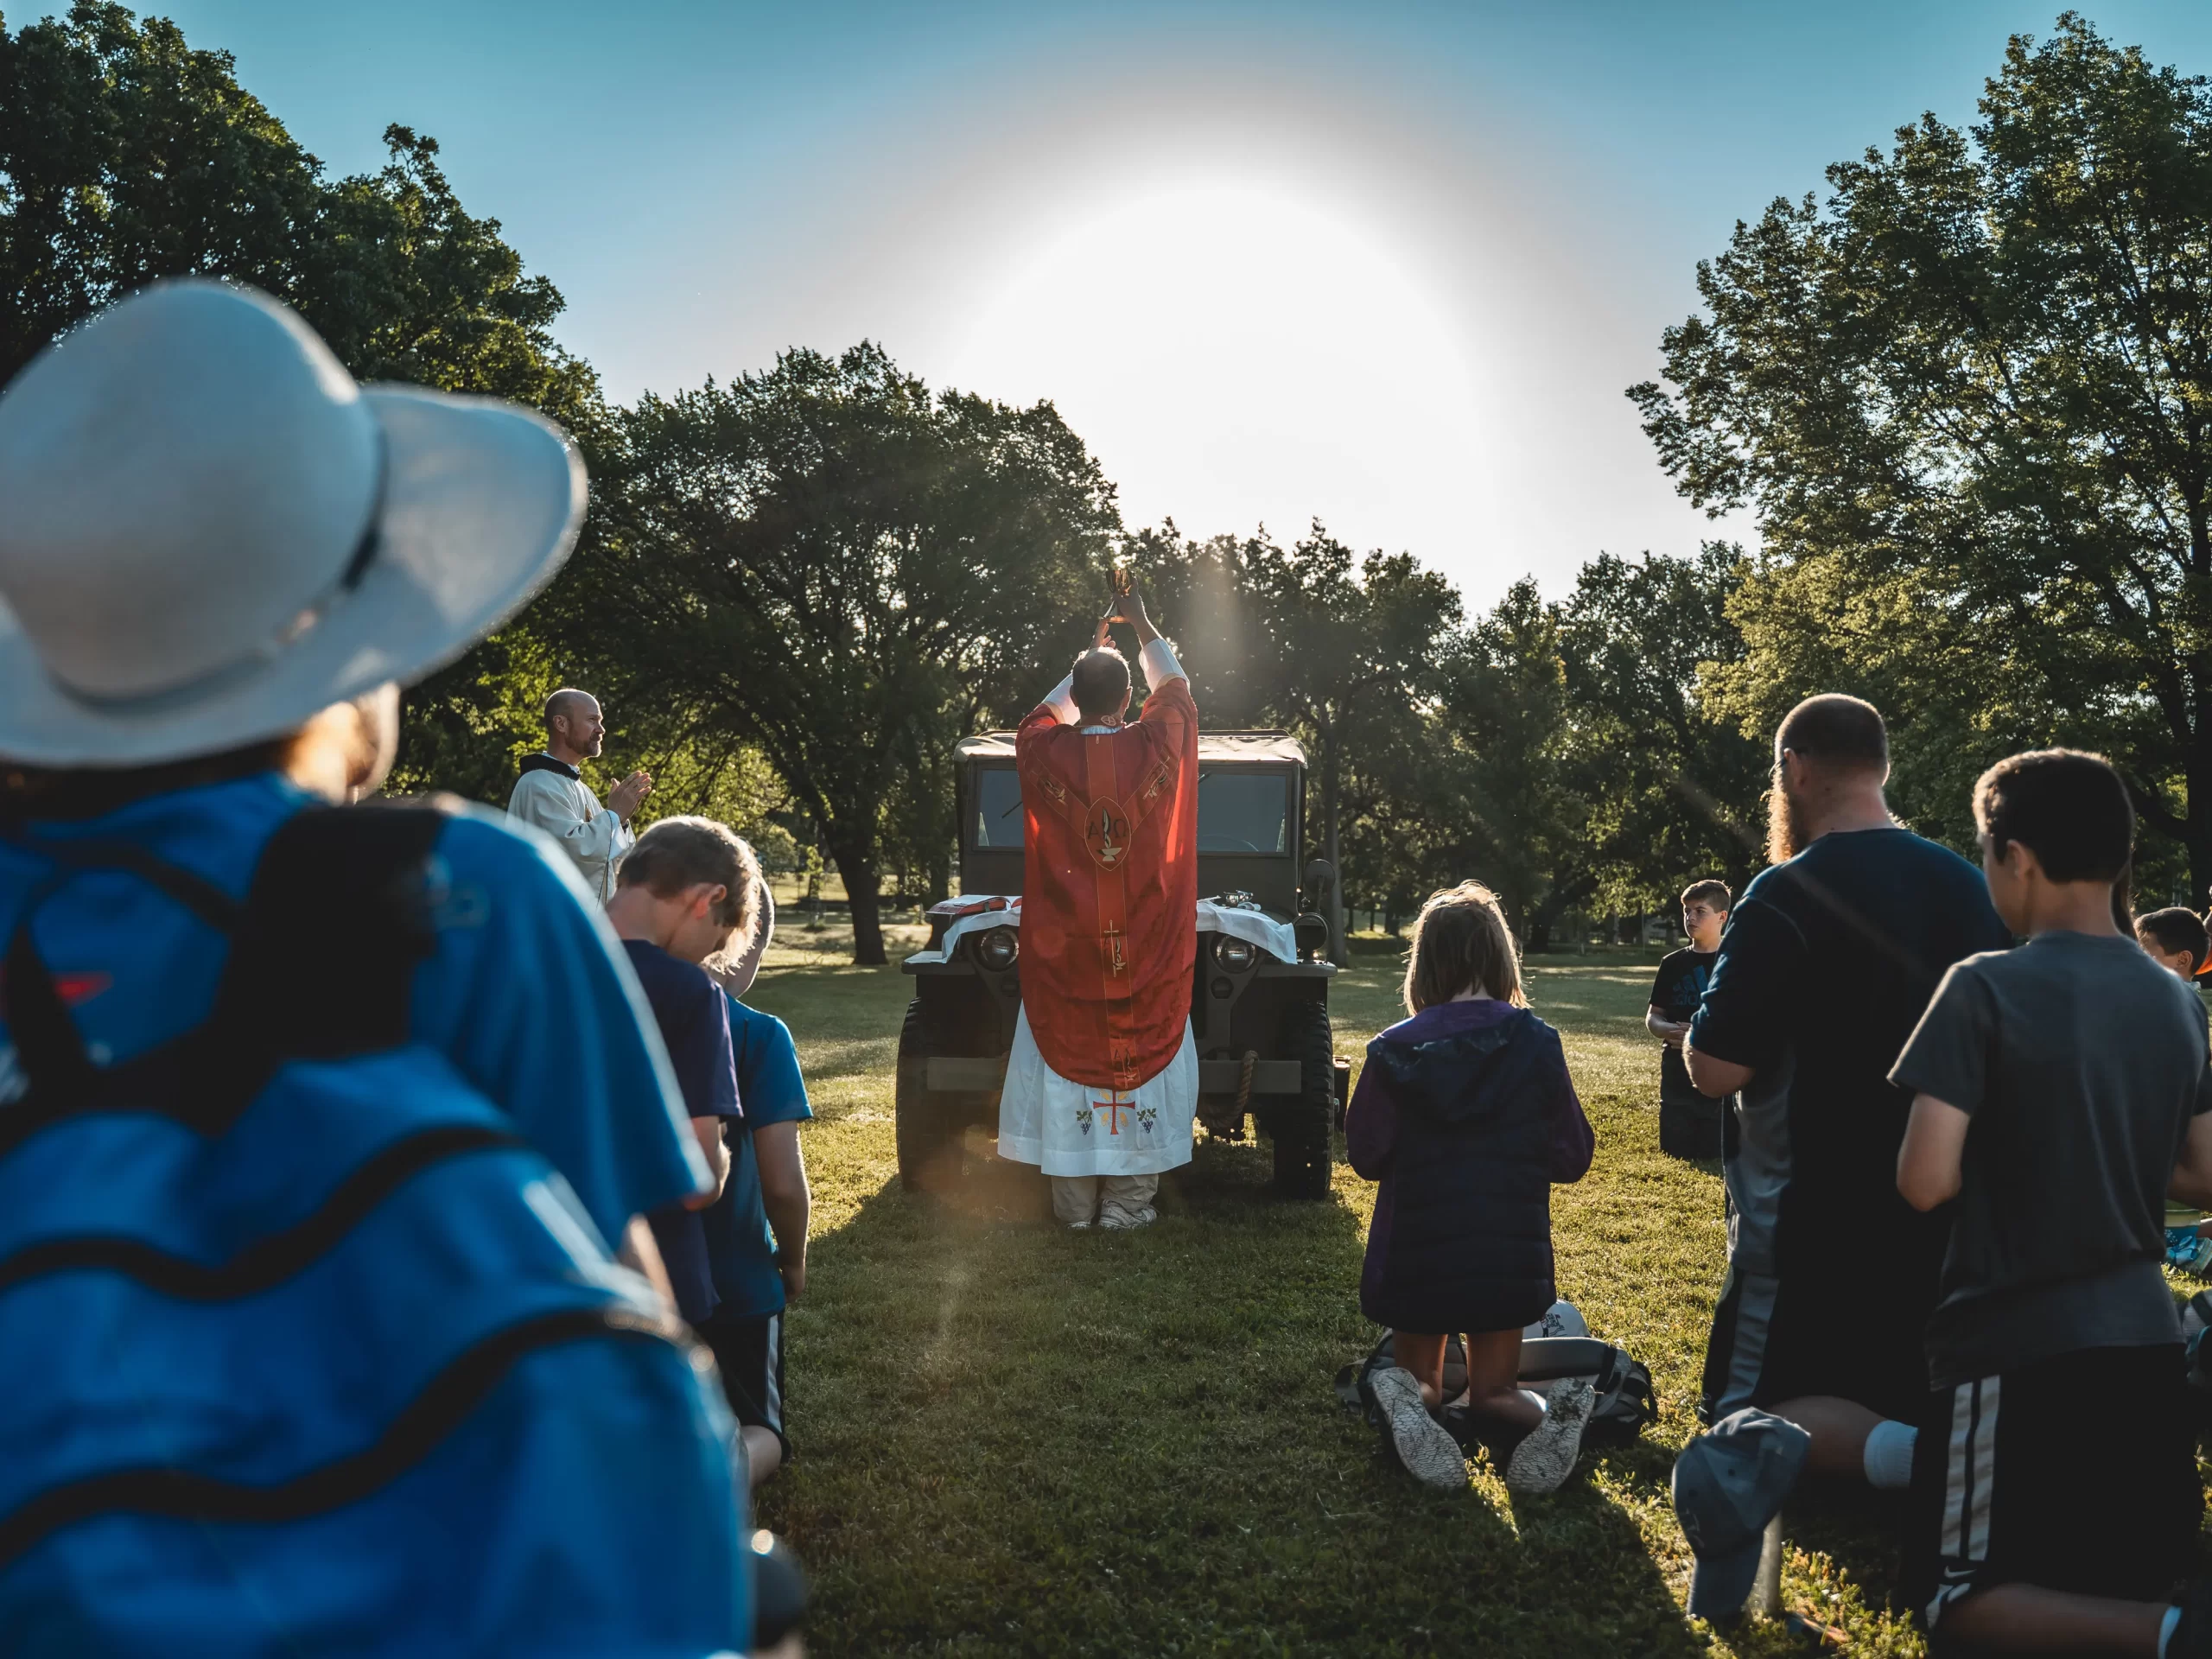 Pilgrims celebrate Mass on the hood of a Jeep during the Kansas Camino, emulating a famous photo of Father Emil Kapaun. Credit: Diocese of Wichita